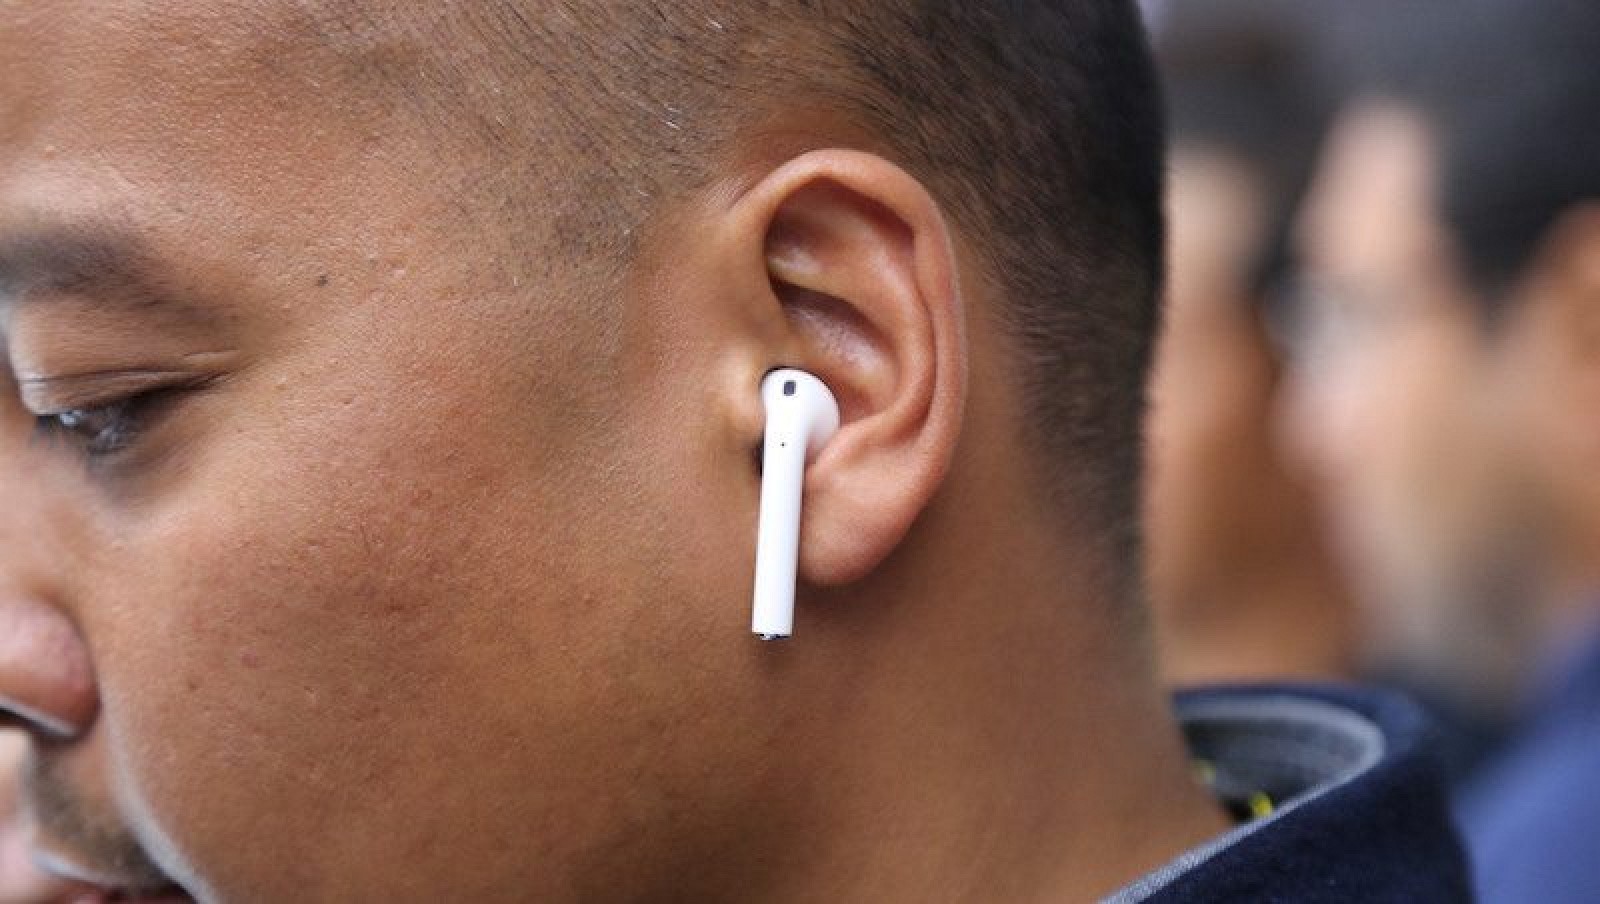 AirPods Impressions: Potential 'Game-Changer' With Good Design, but